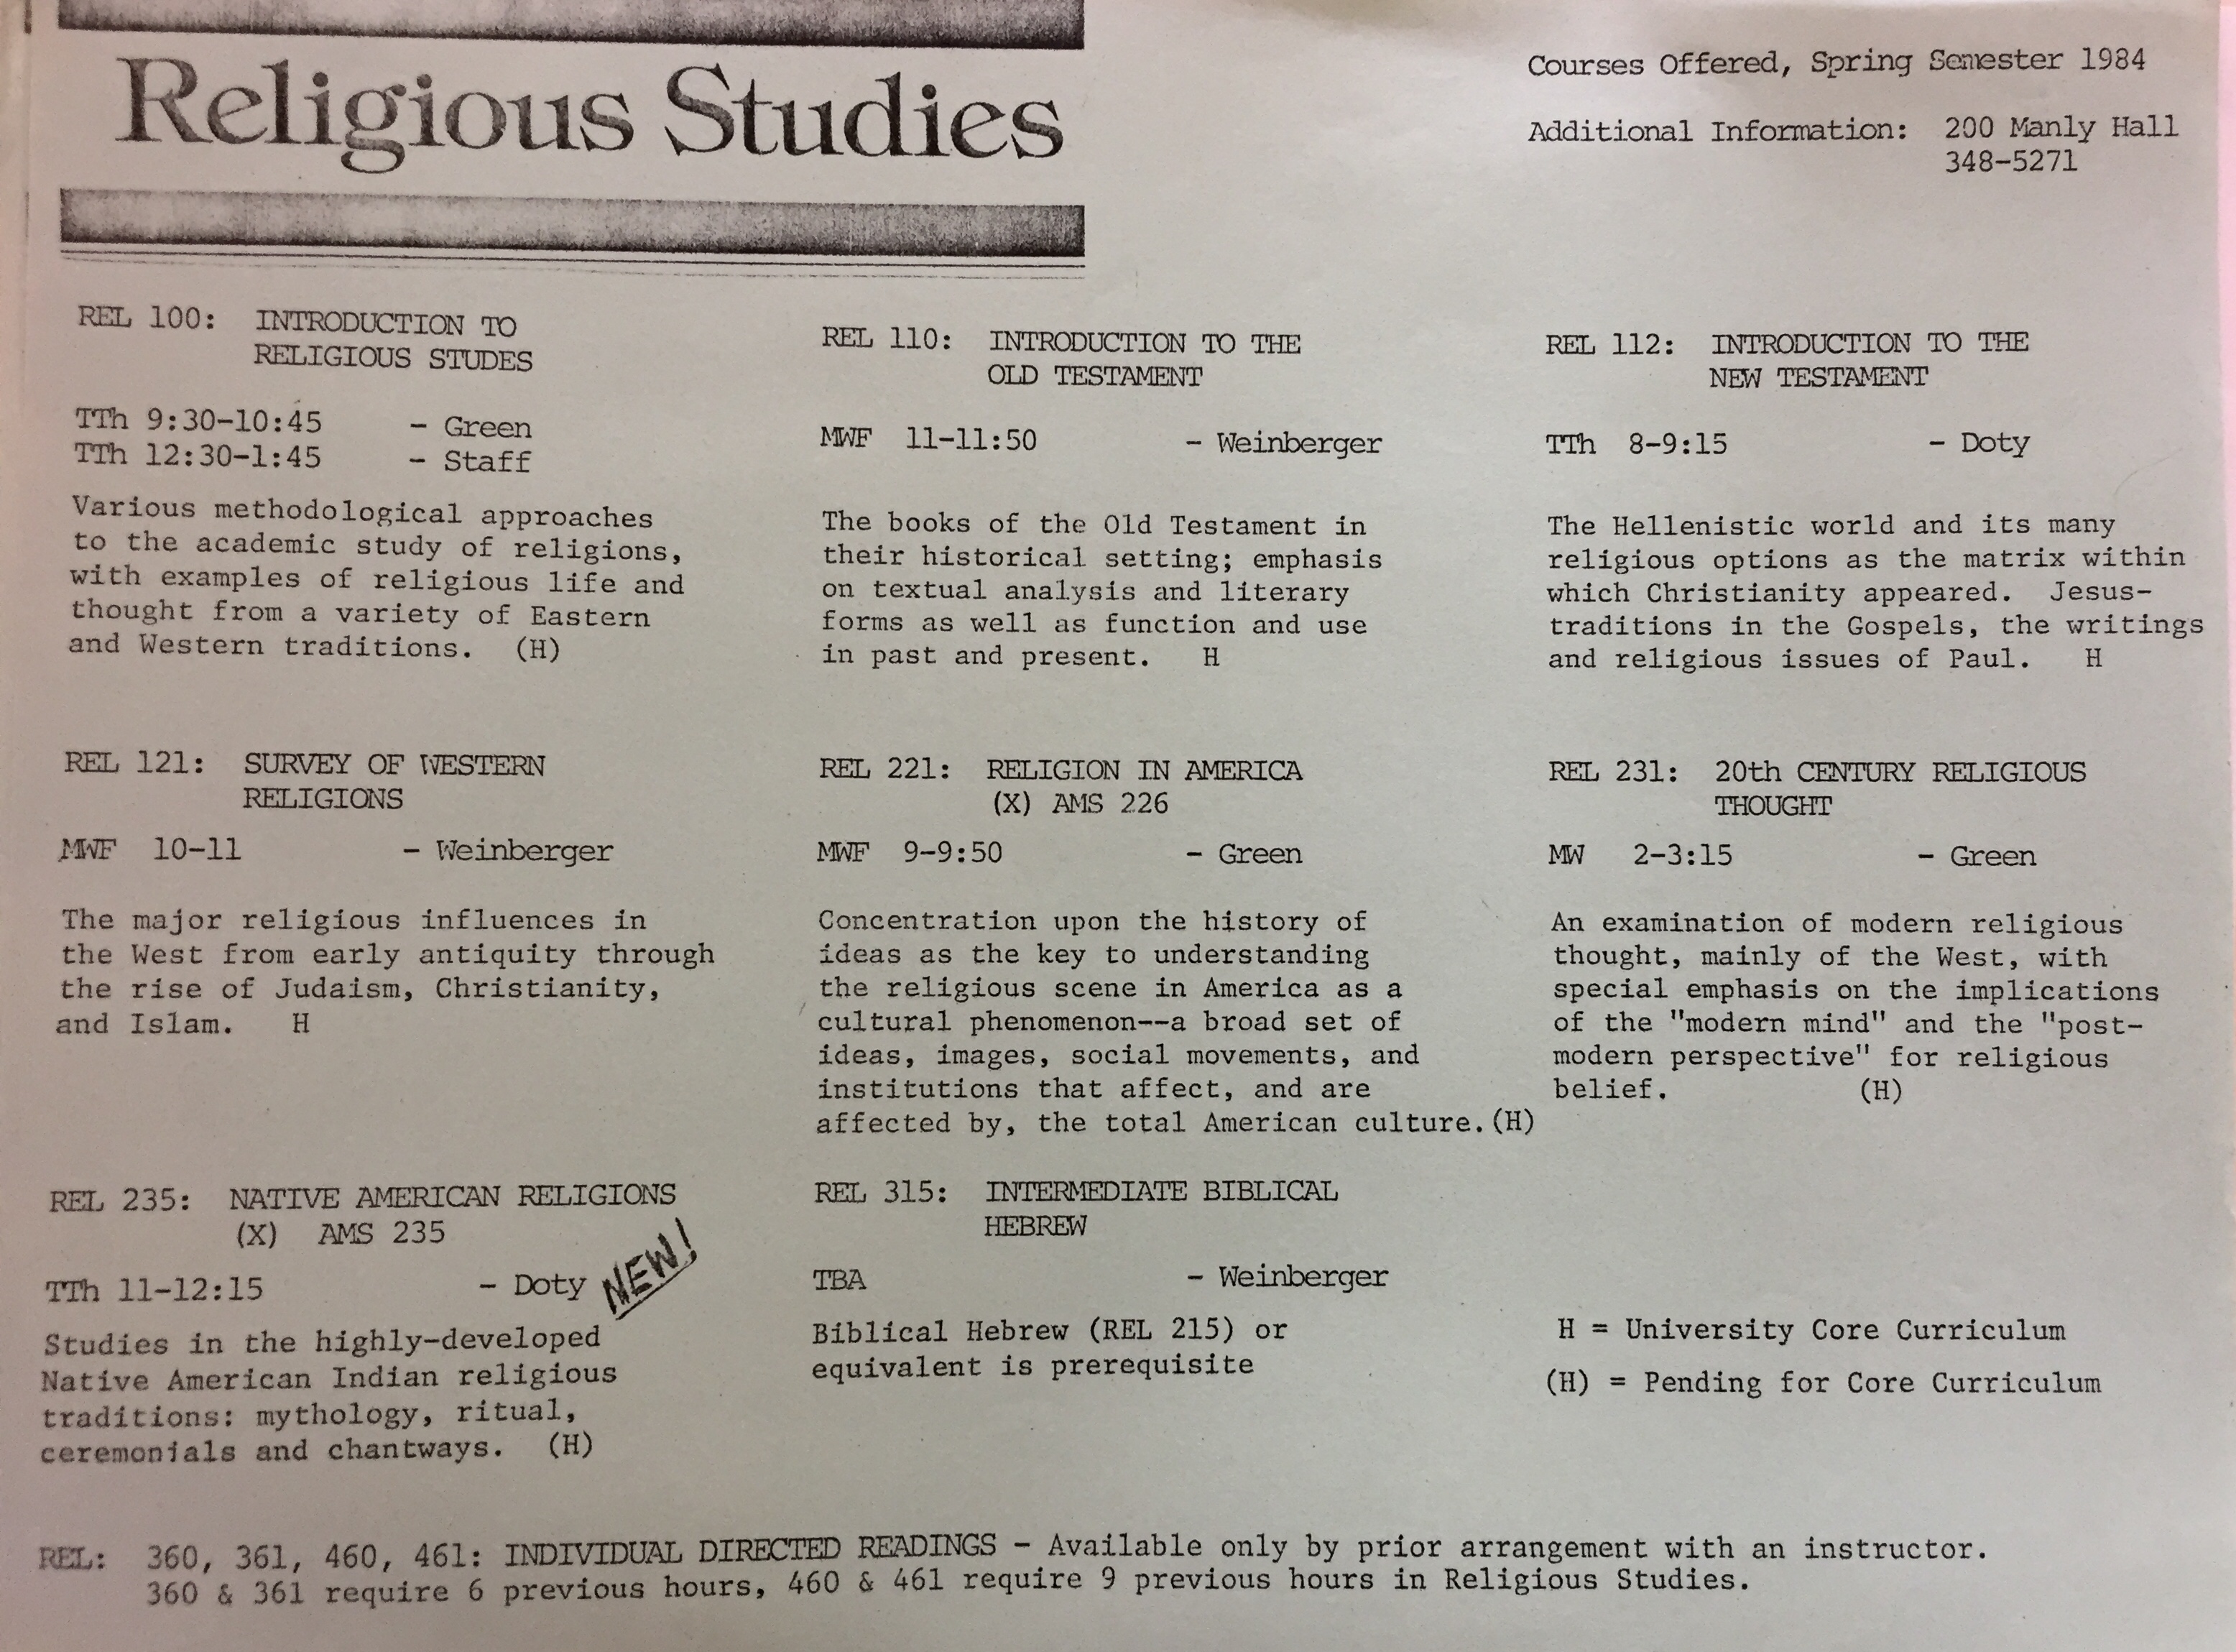 Spring semester 1984 flyer for courses in the department